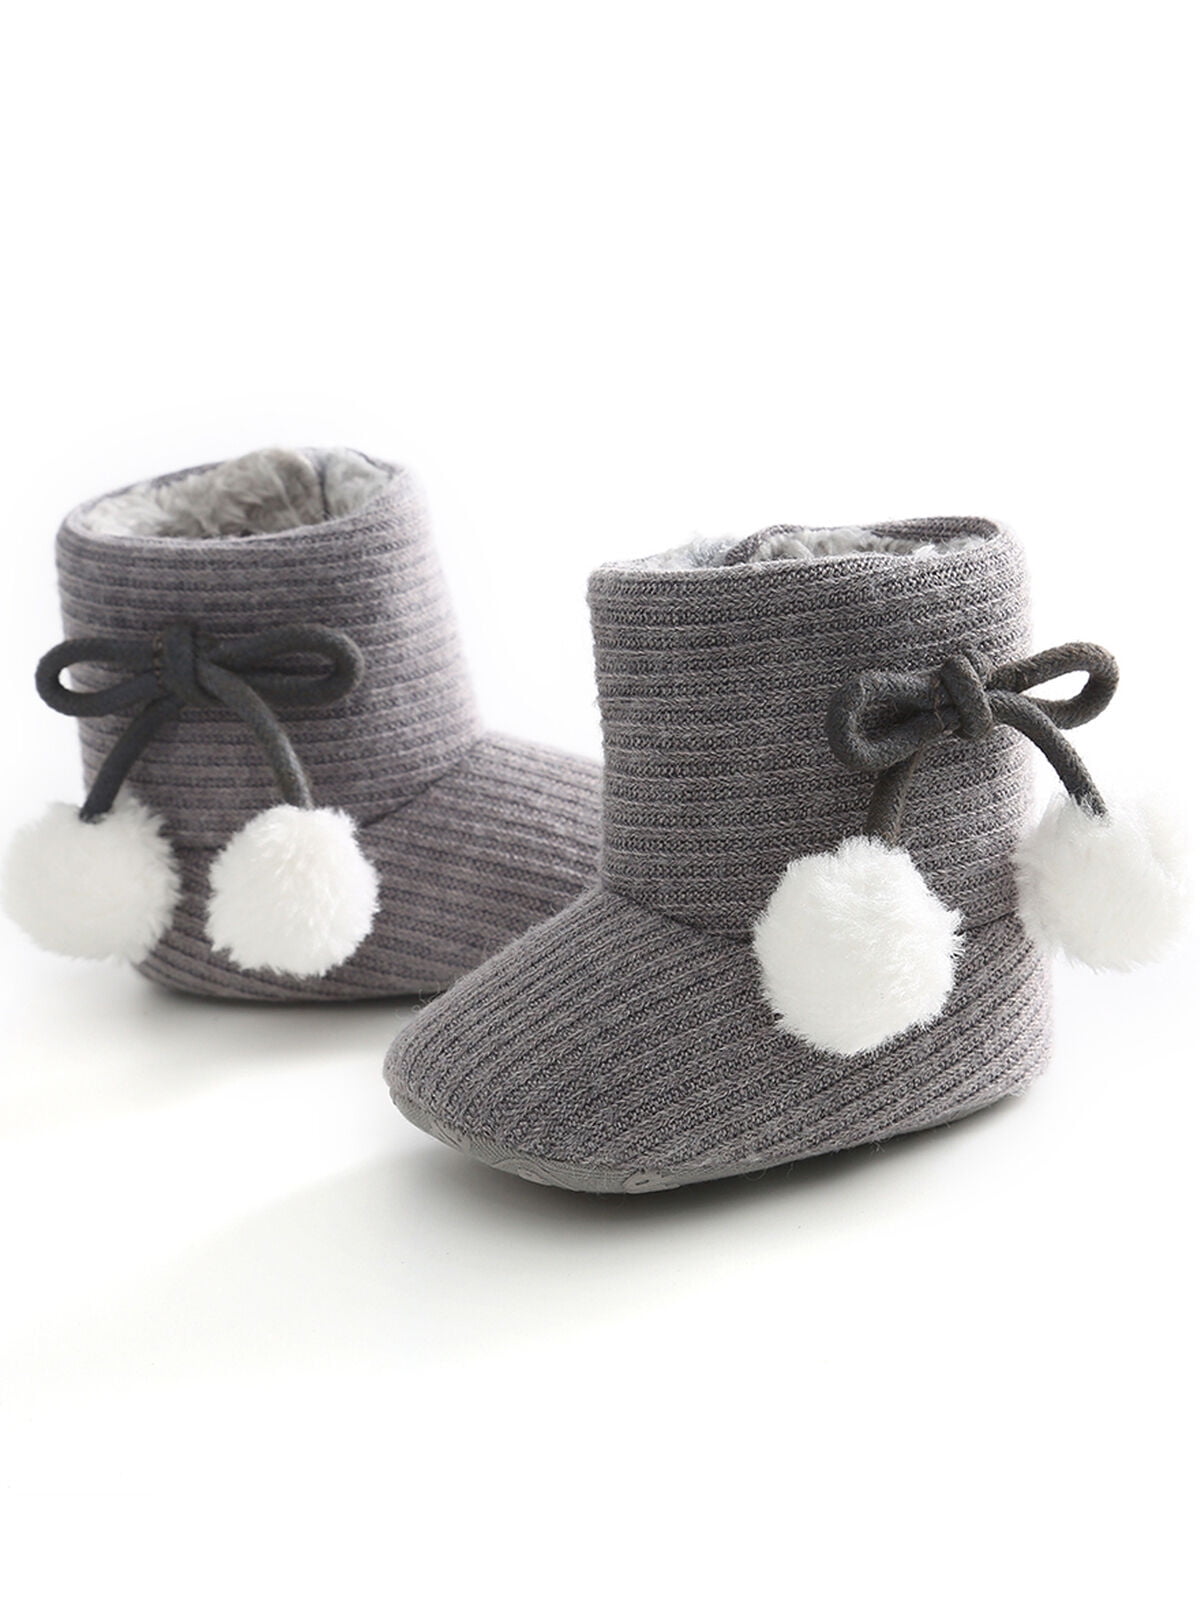 4 Color Faux Suede Faux Fur Casual Booties Toddler Kids Girls Winter Boots Shoes 